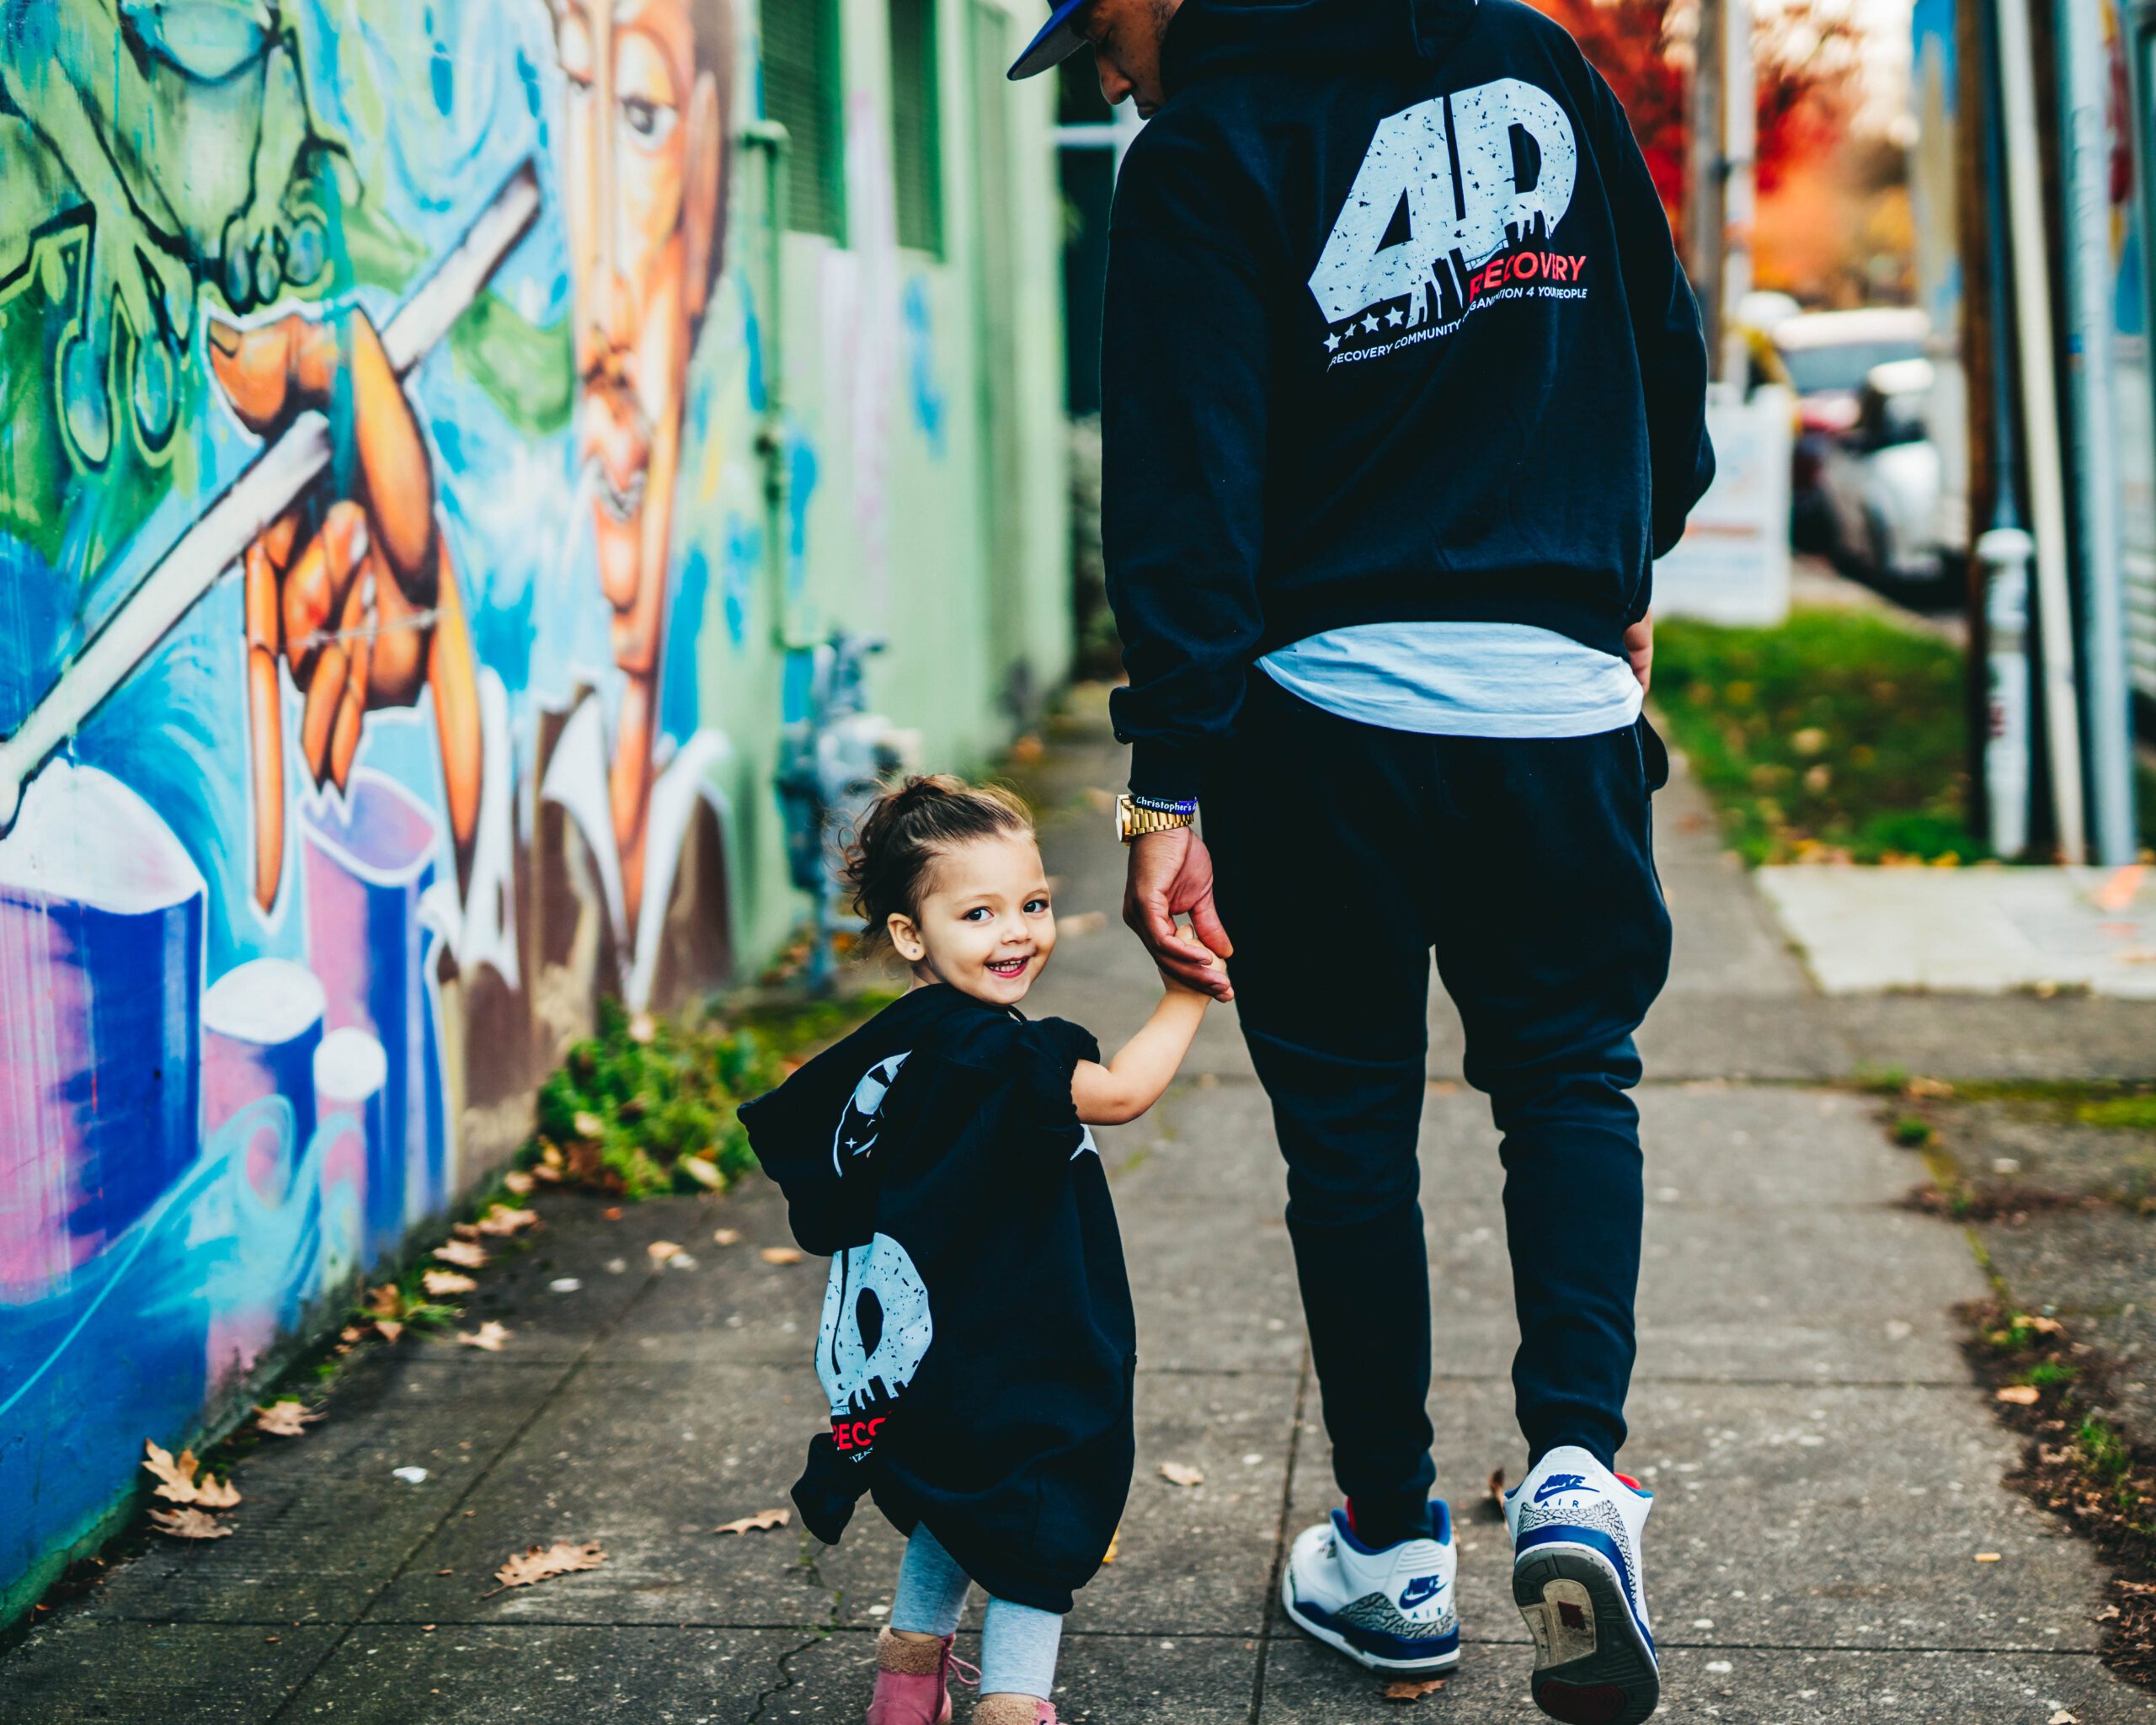 Young man walks with child holding hands next to graffiti wall, both wear 4D sweatshirts.